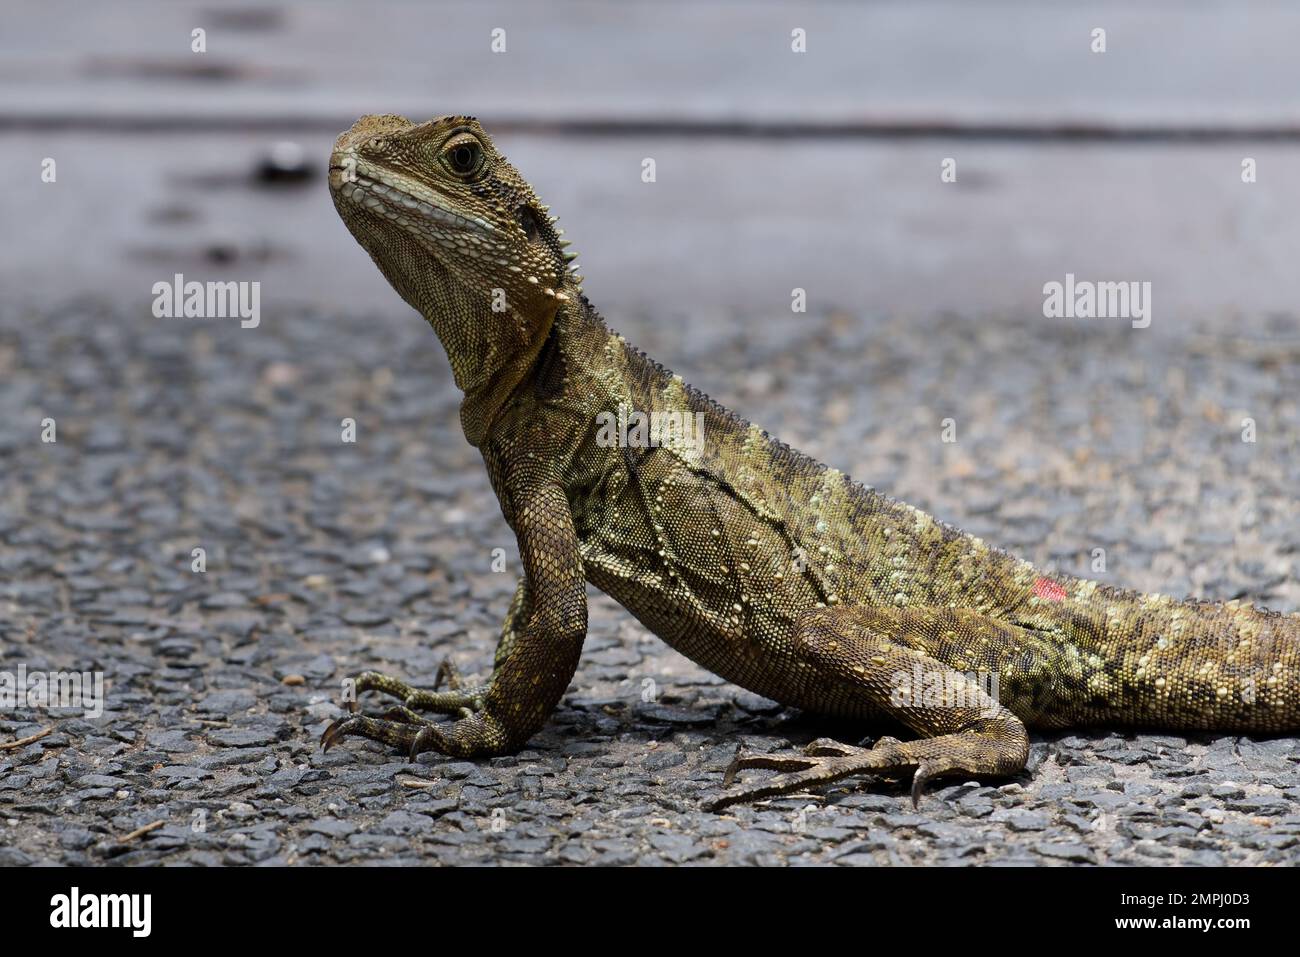 Eastern Water Dragon stationary in day Stock Photo